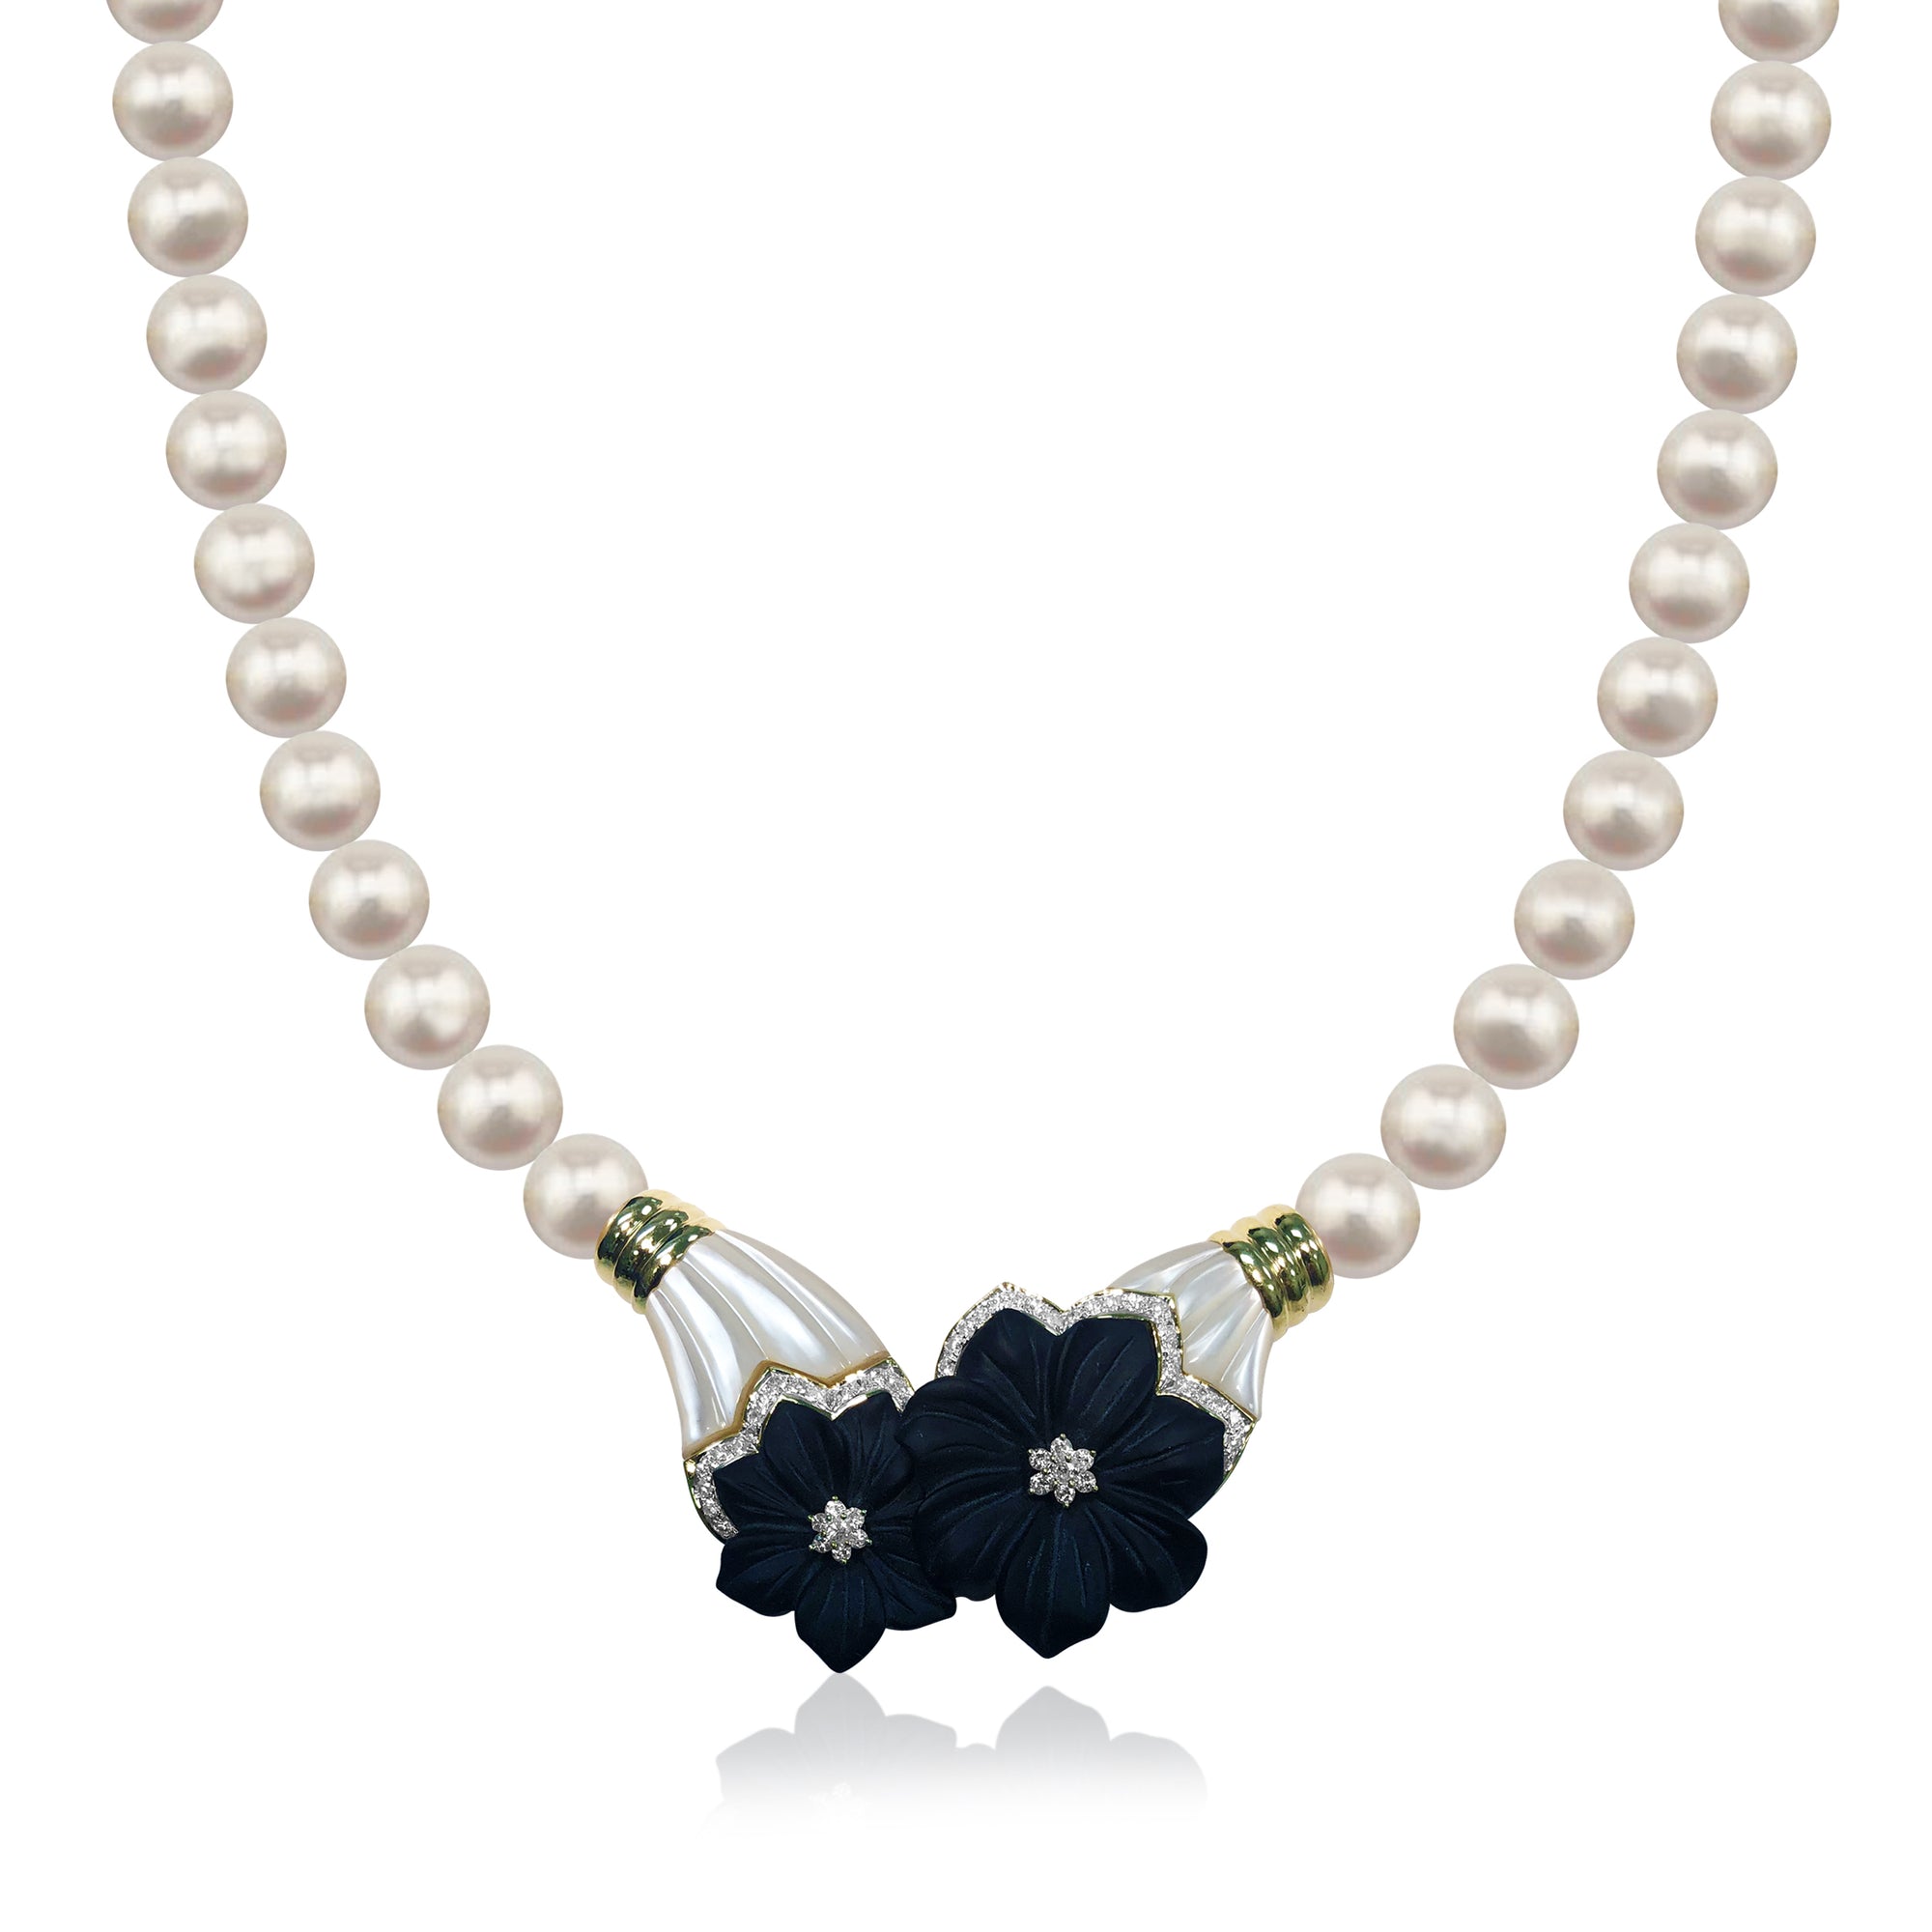 14k Black Onyx and White Freshwater Pearl Necklace 36